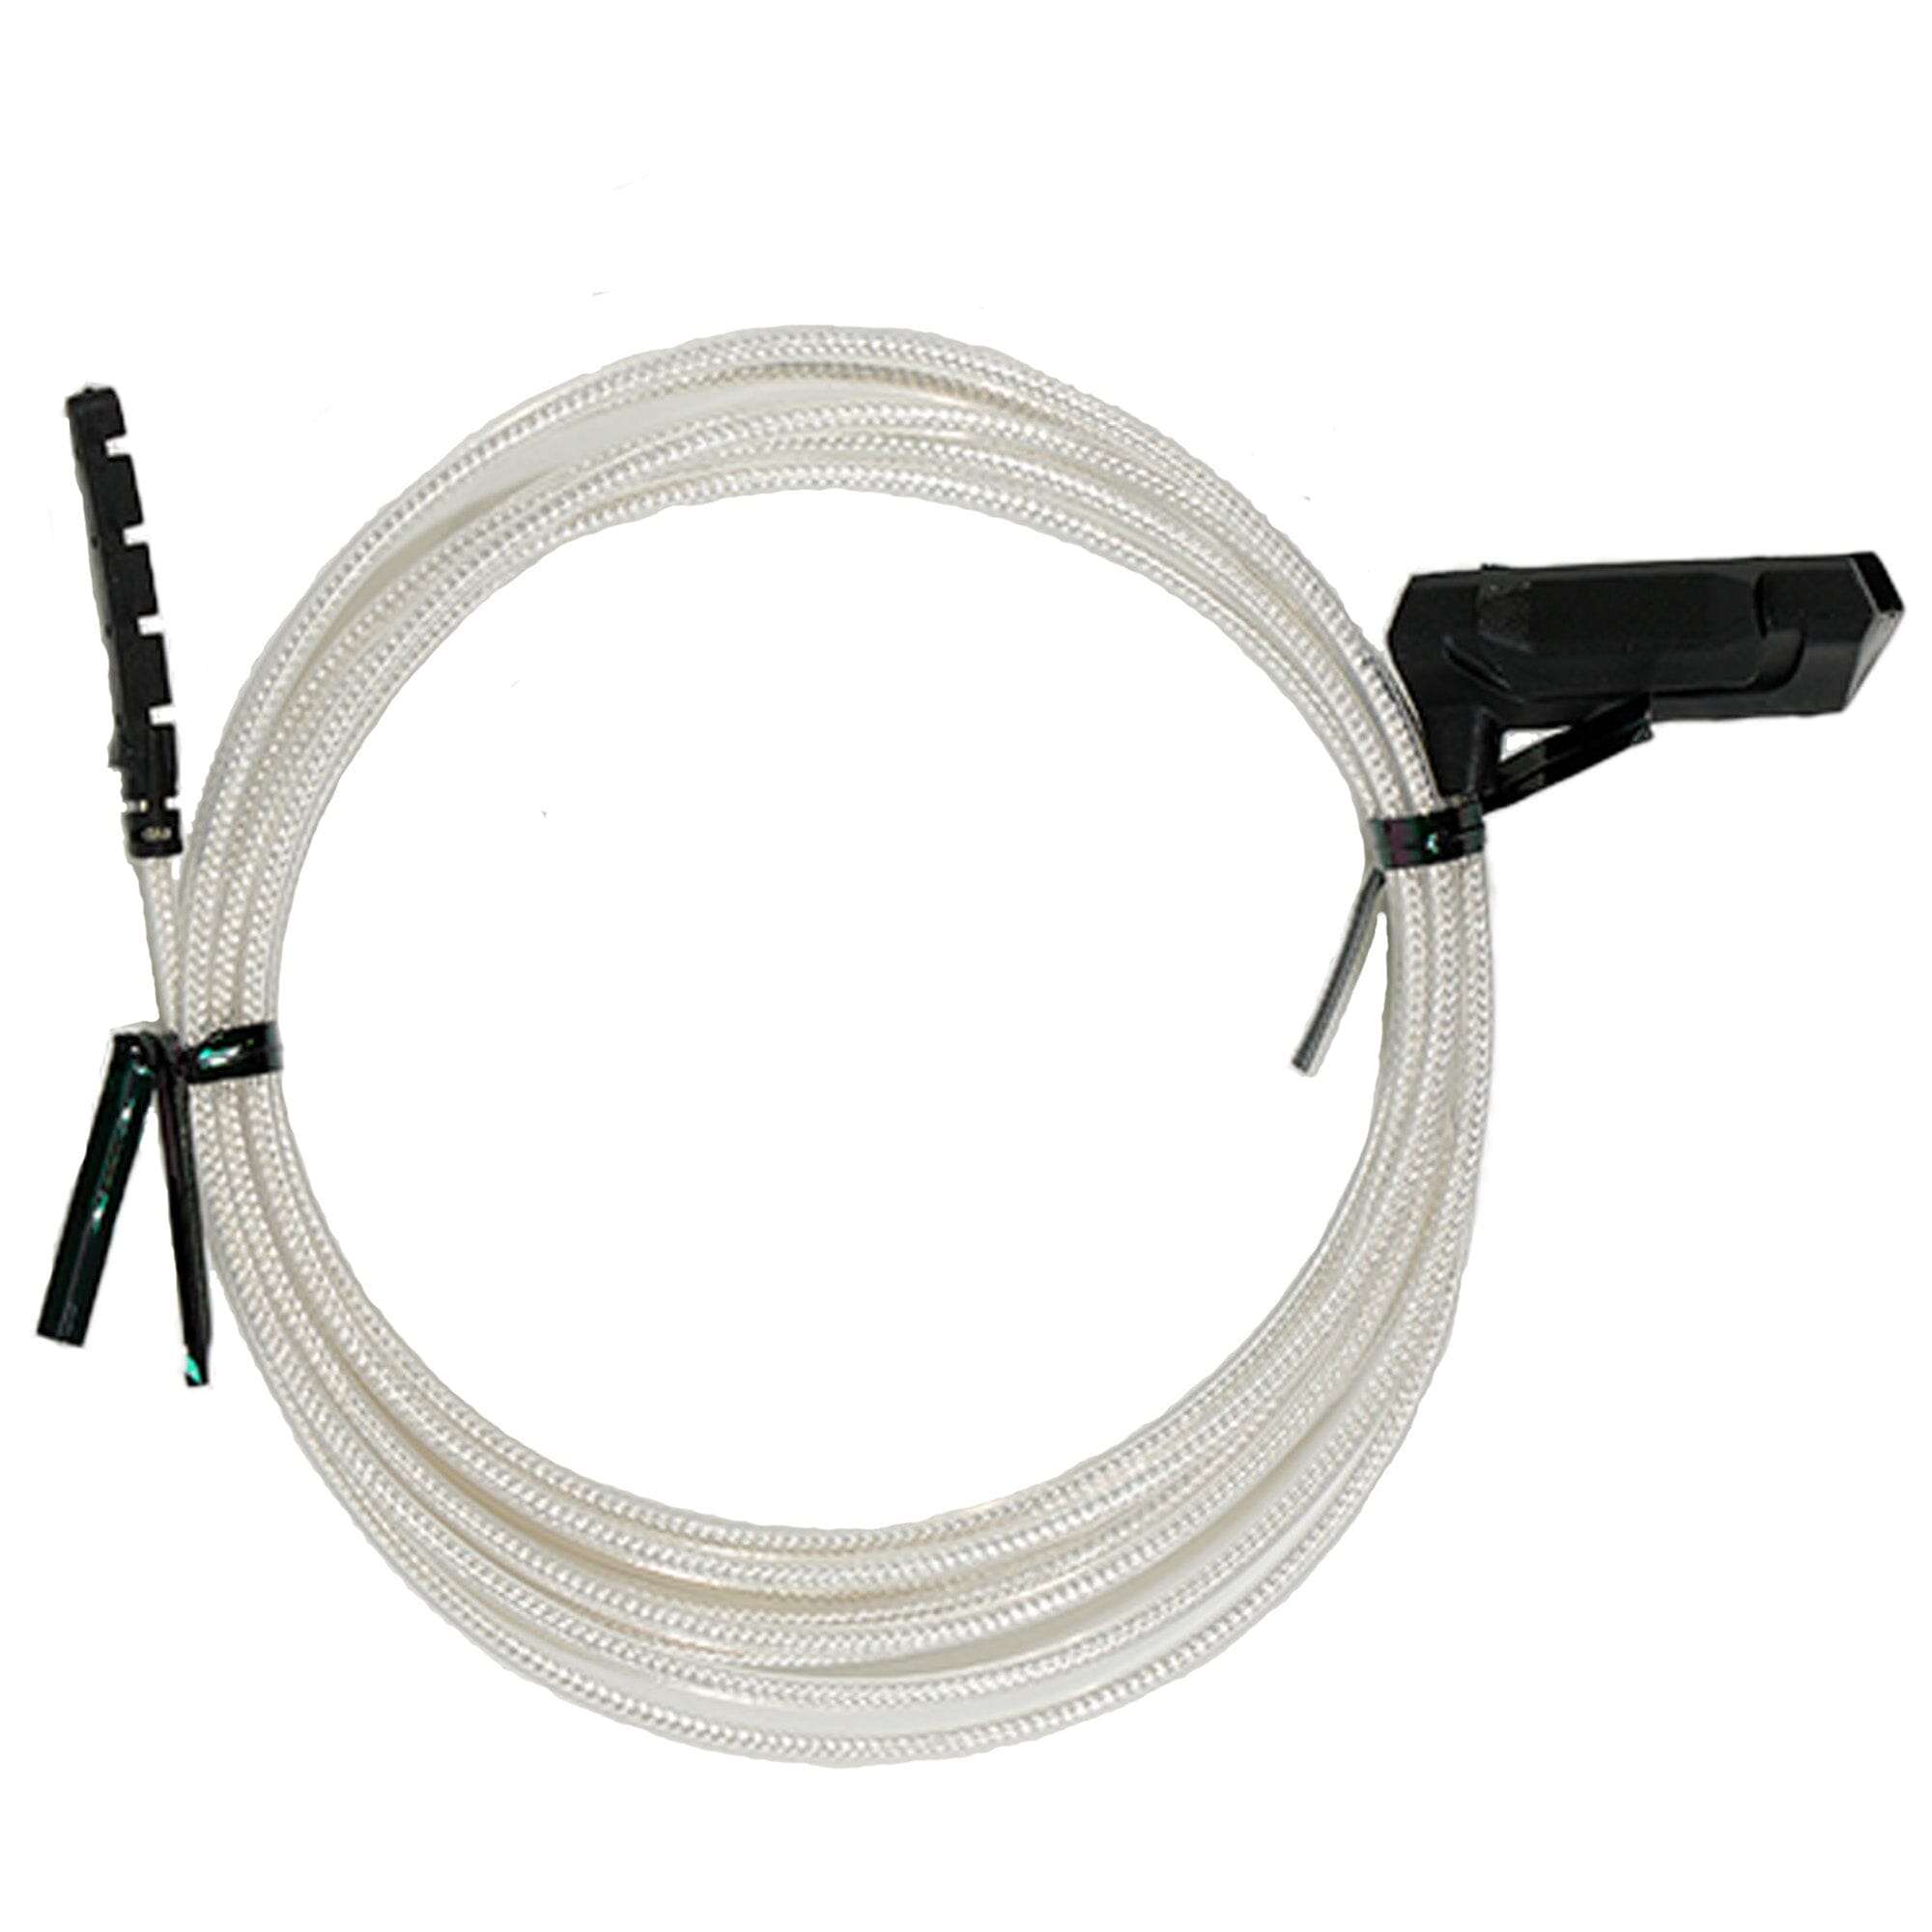 DEUS II Aerial Antenna with 115cm Cable